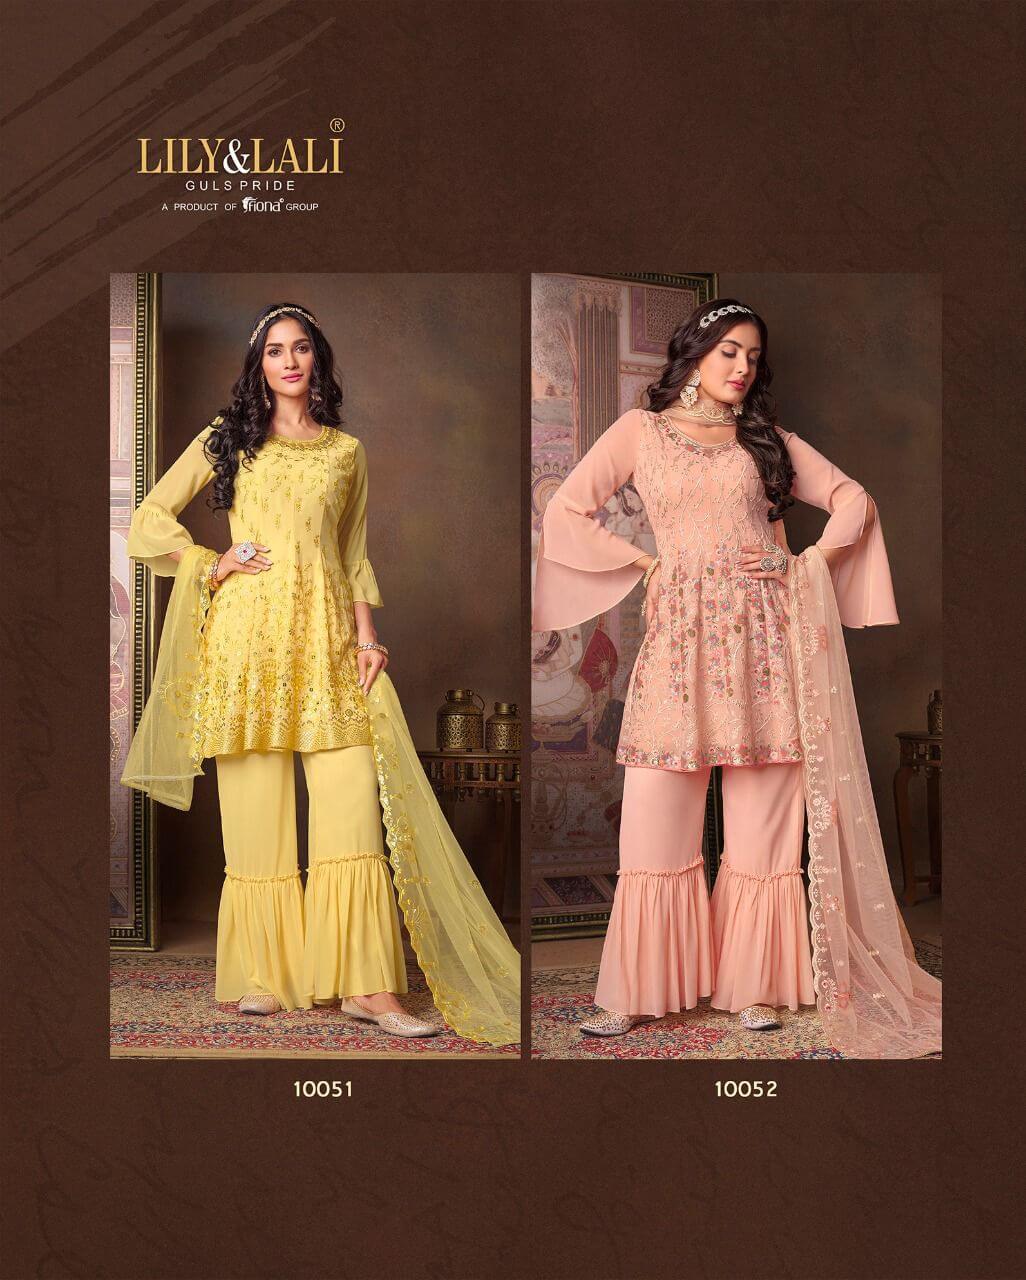 Lily and Lali Arizona Designer Wedding Party Salwar Suits collection 1